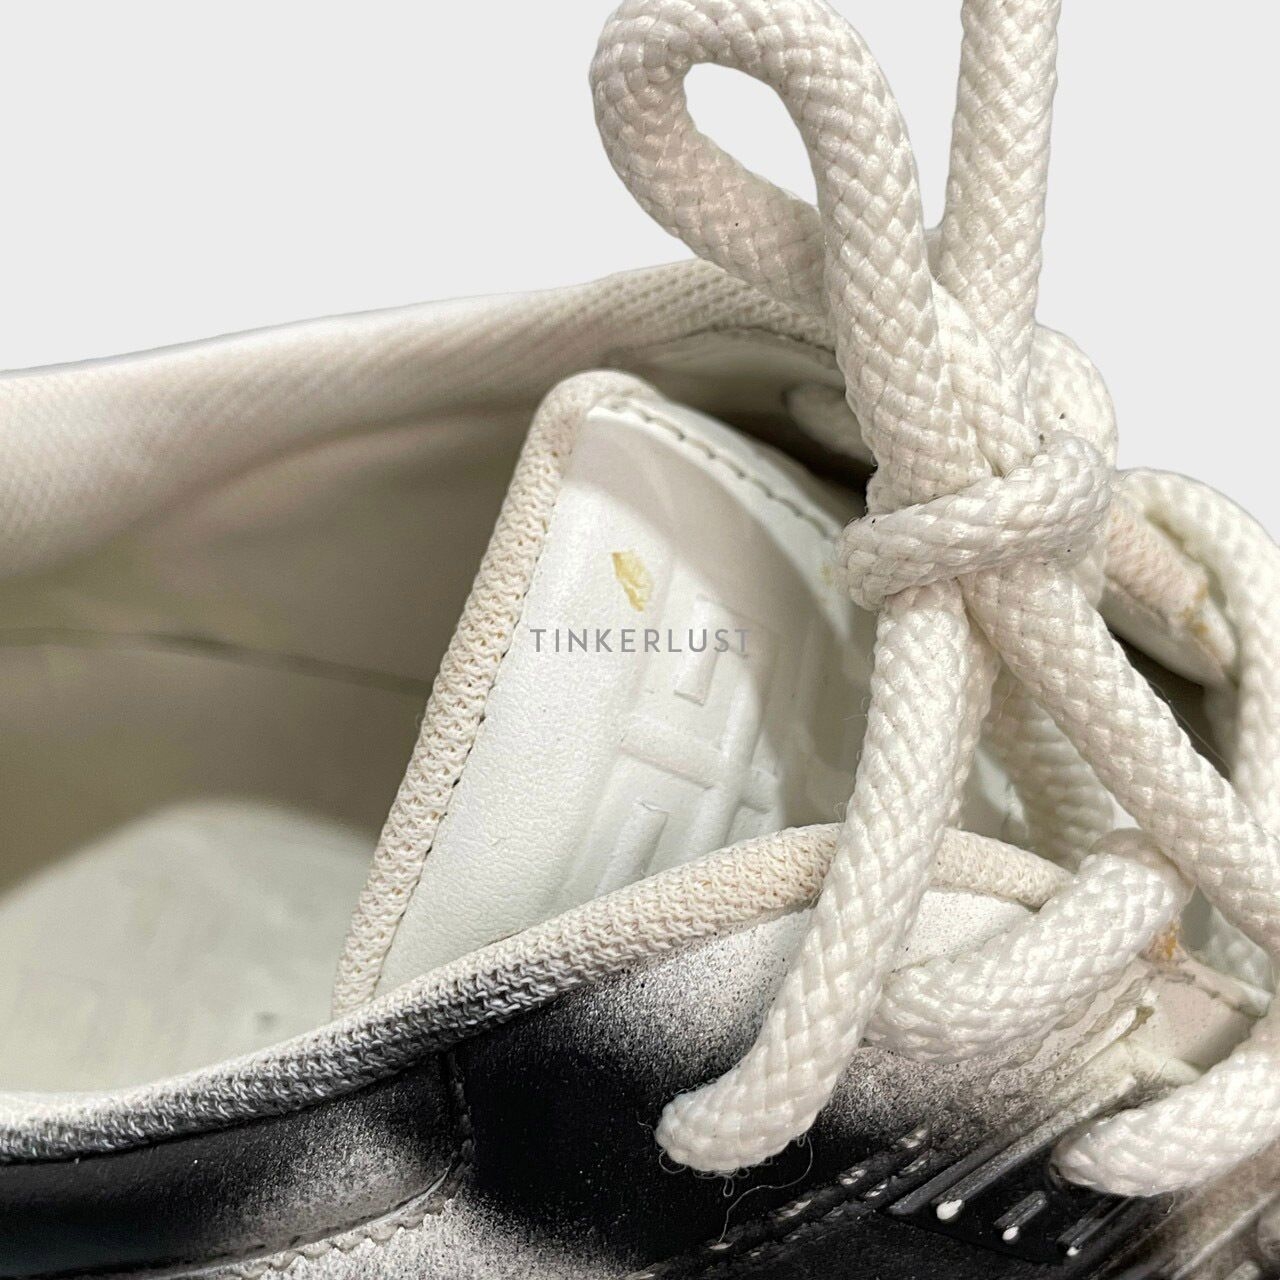 Givenchy x Chito GIV1 Lace Up White Leather Sneakers